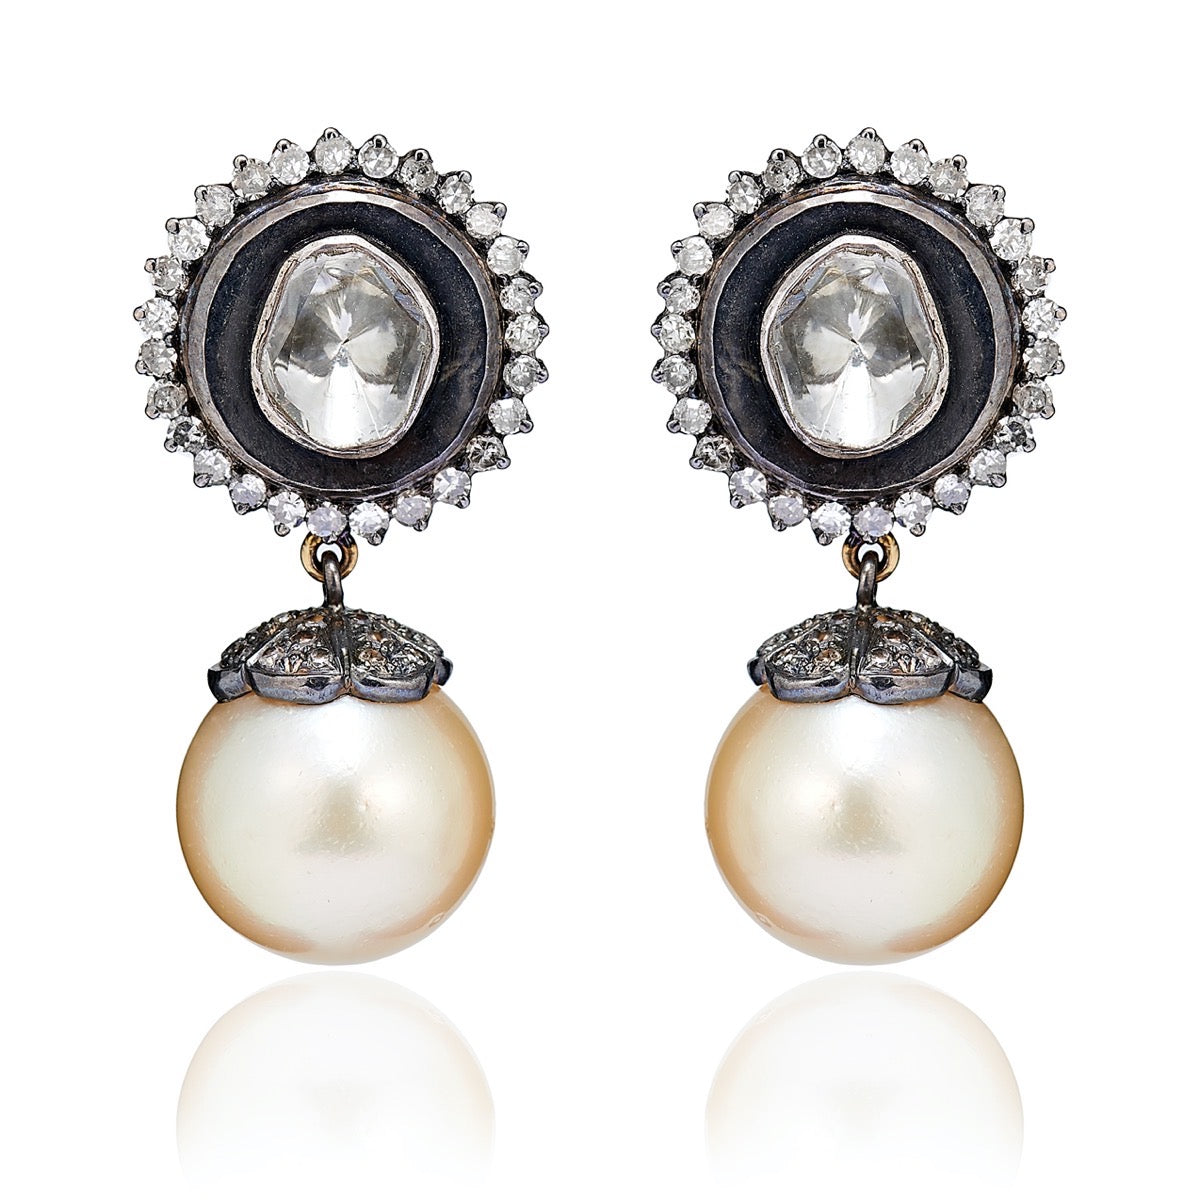 Antique Star Pearl and Diamond Earrings